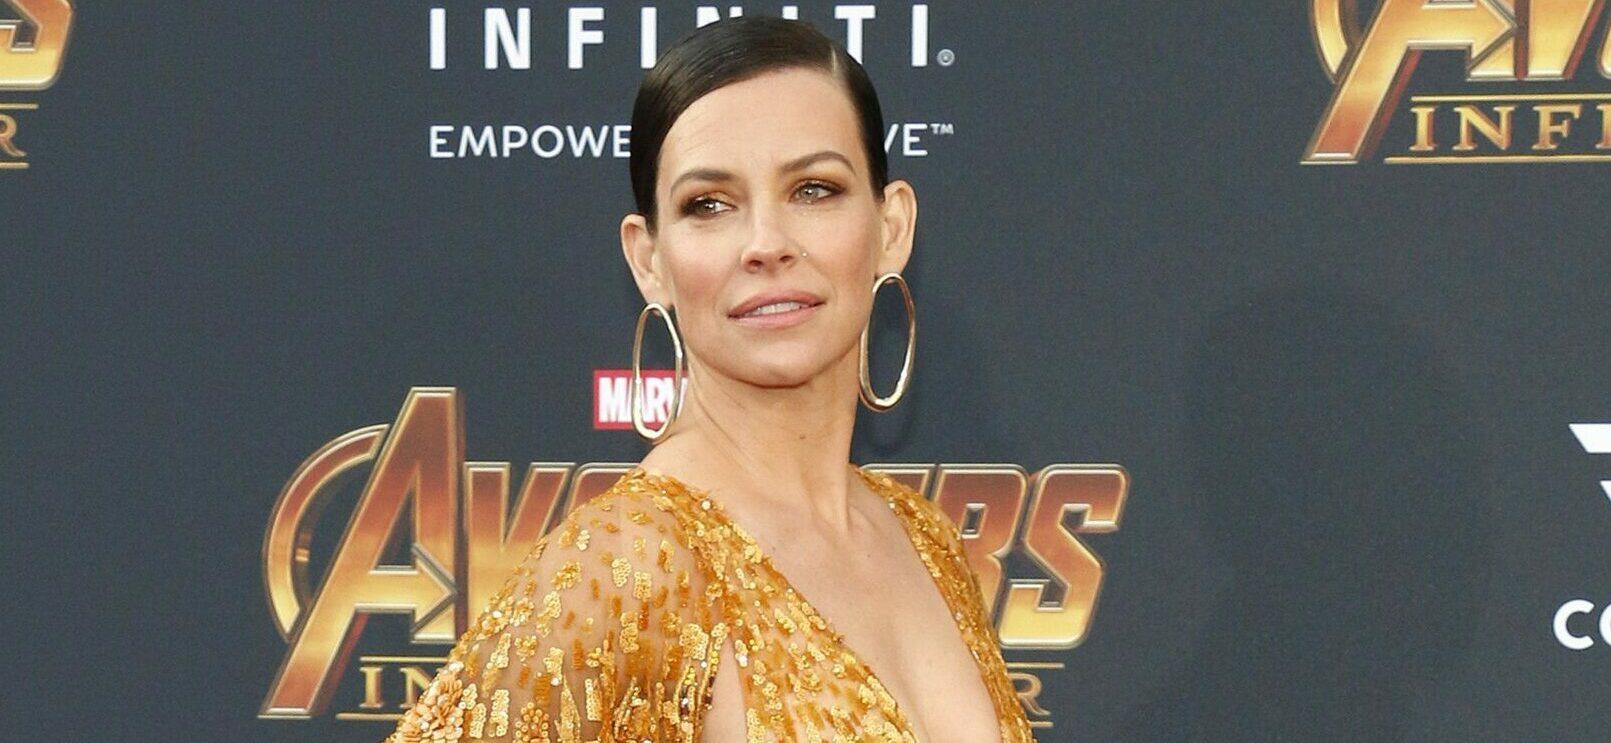 Evangeline Lilly Wants Justin Trudeau To Meet With Vaccine Mandate Protesters